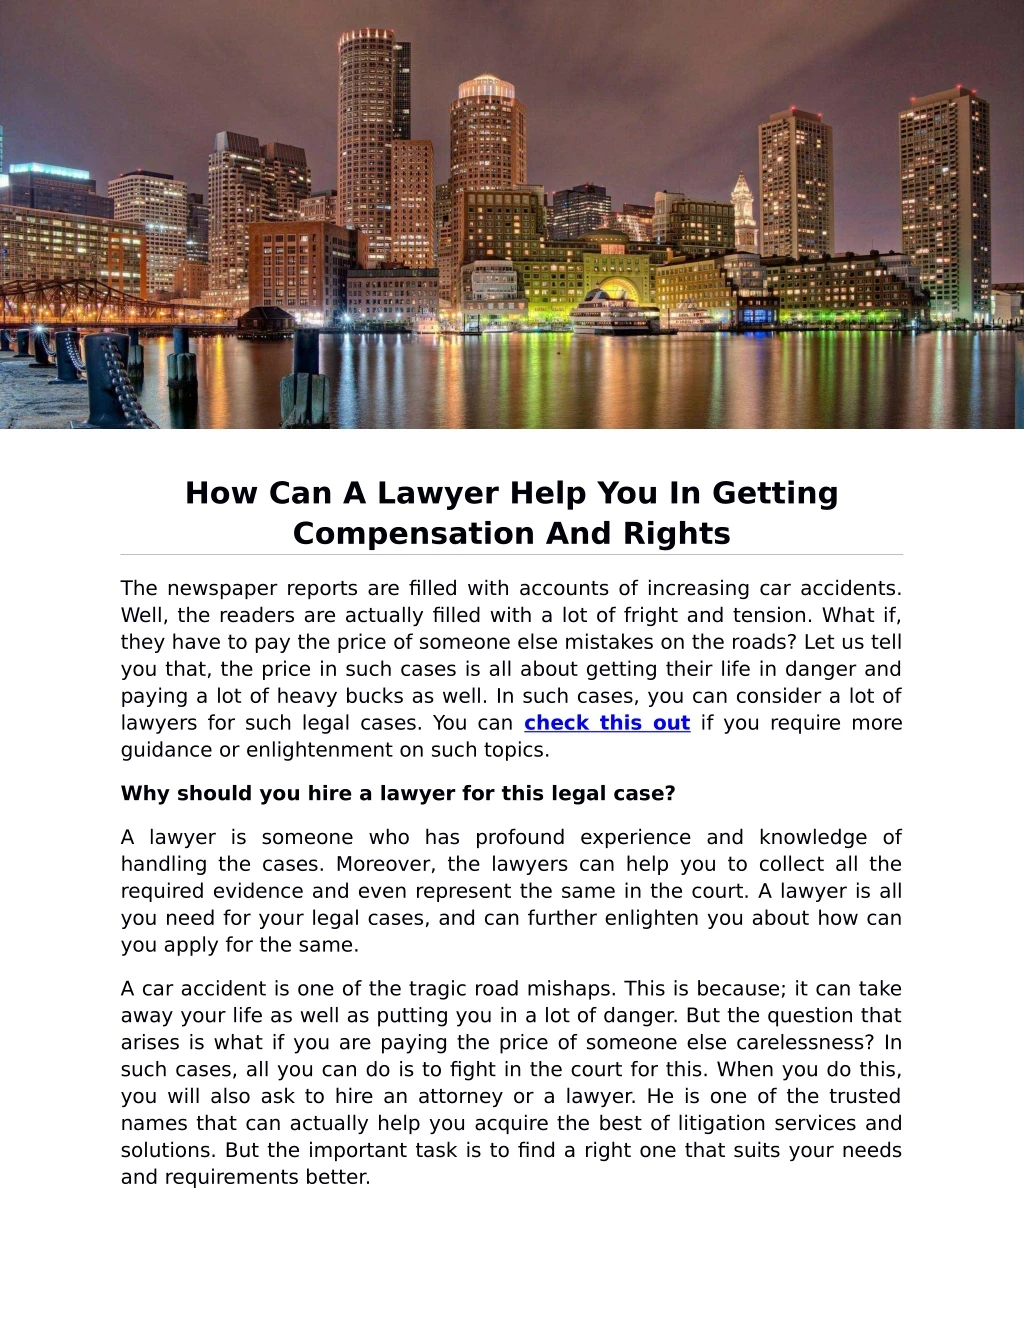 how can a lawyer help you in getting compensation